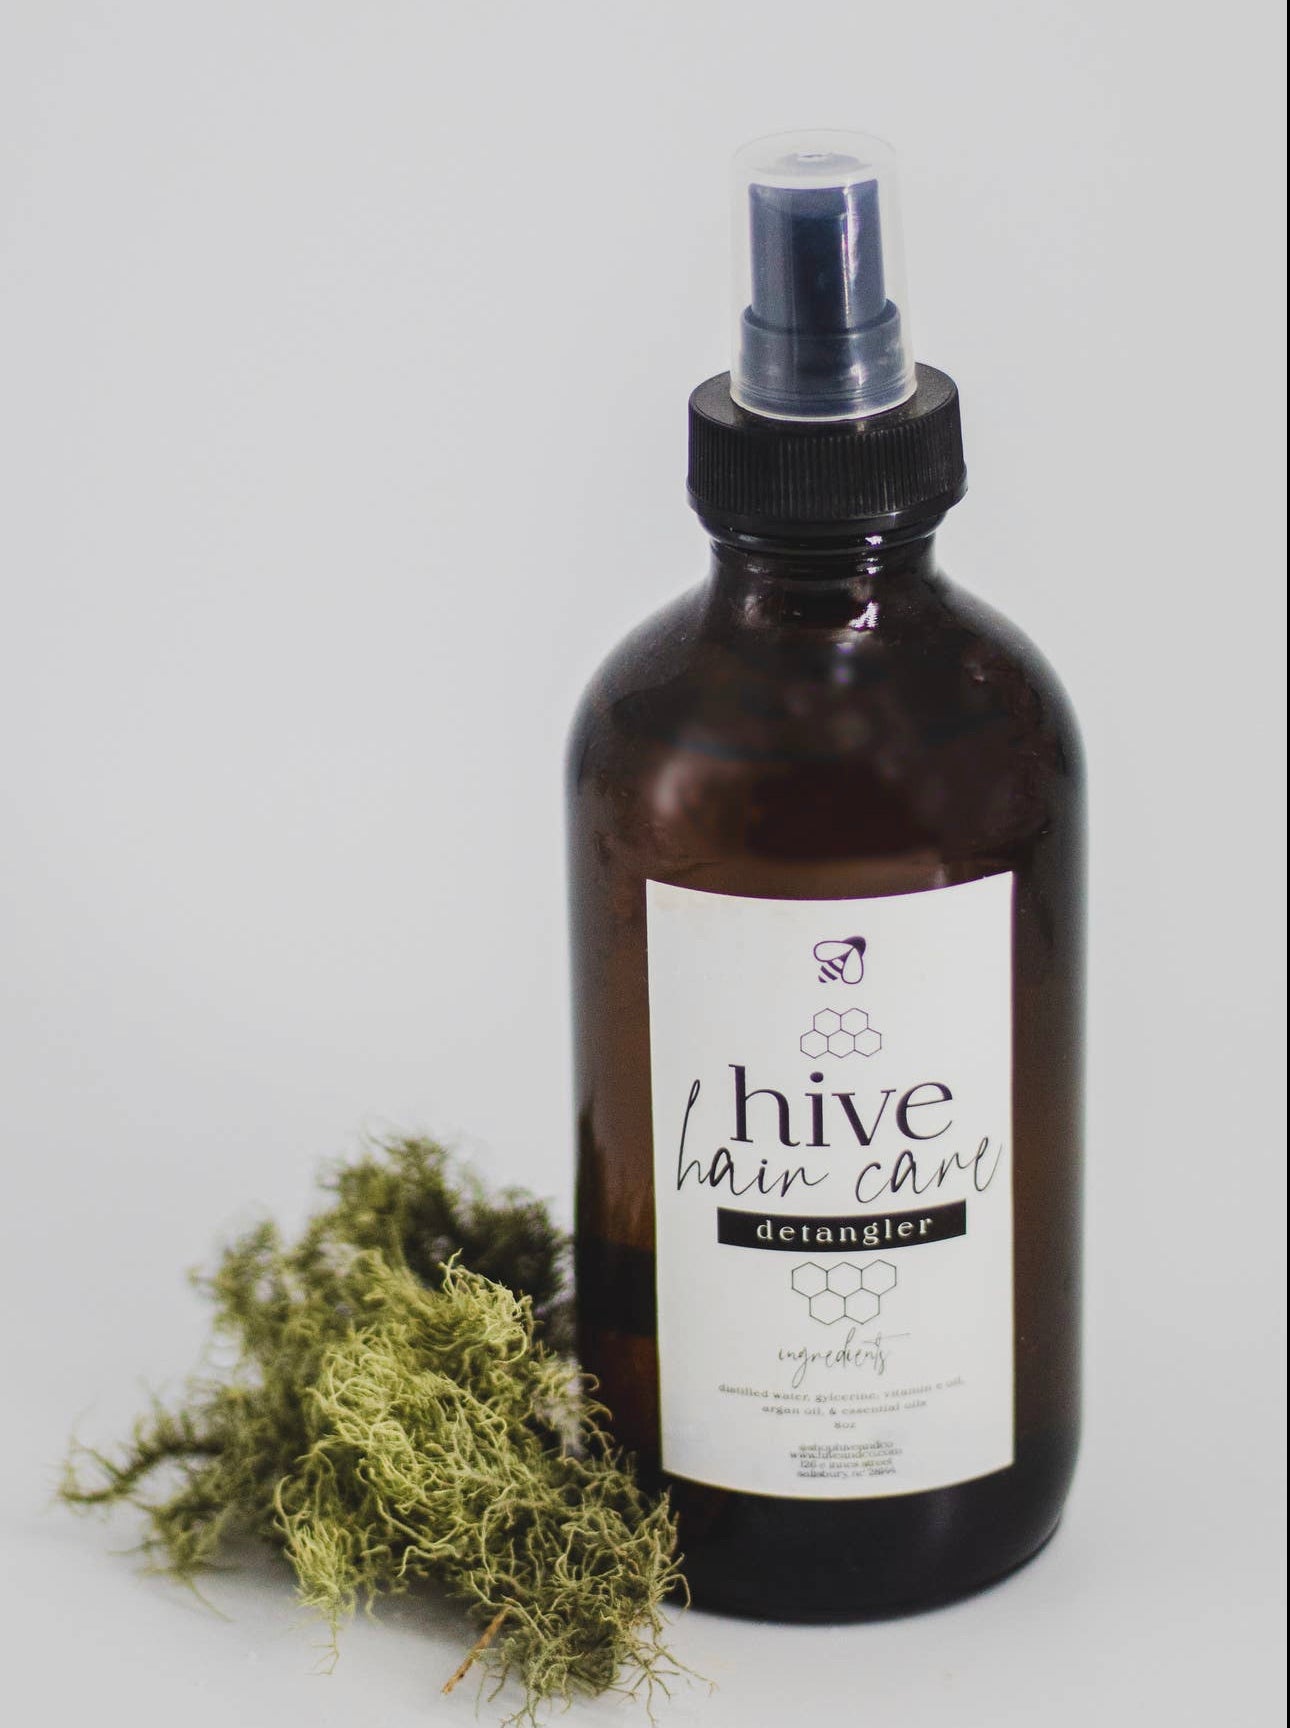 Hive products